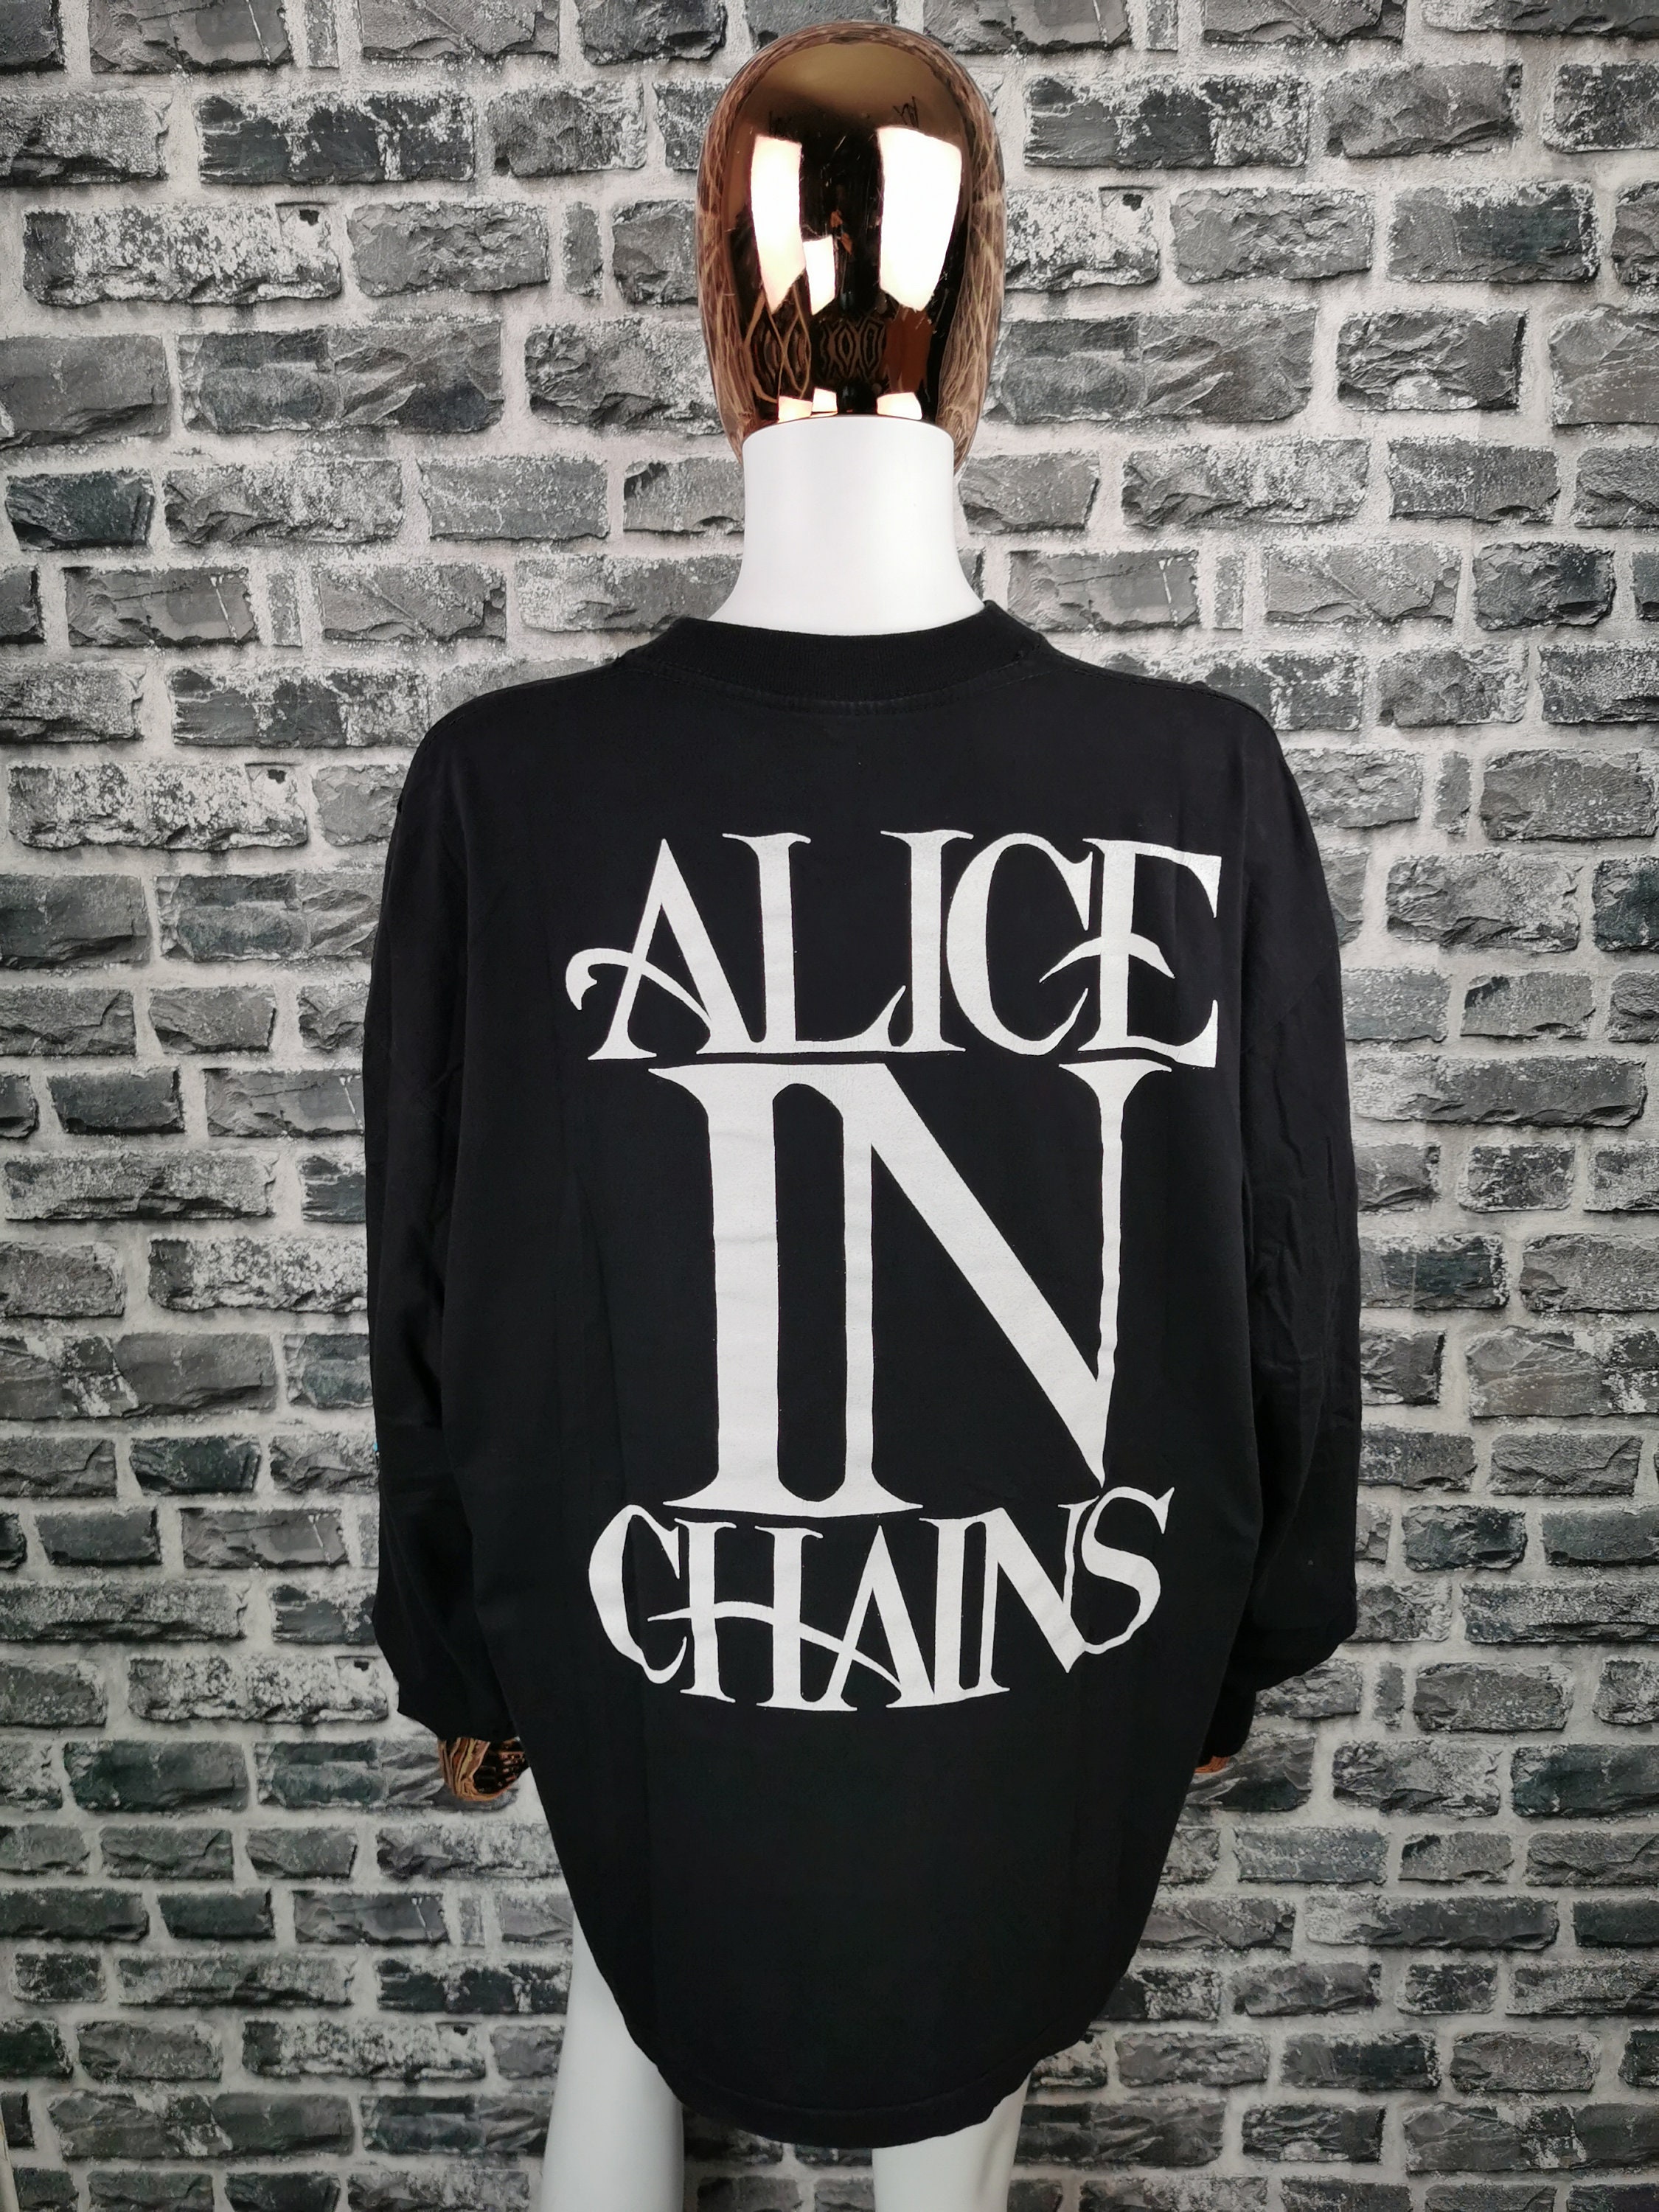 ALICE IN CHAINS 1992 Vintage Longsleeve Shirt Alice in | Etsy